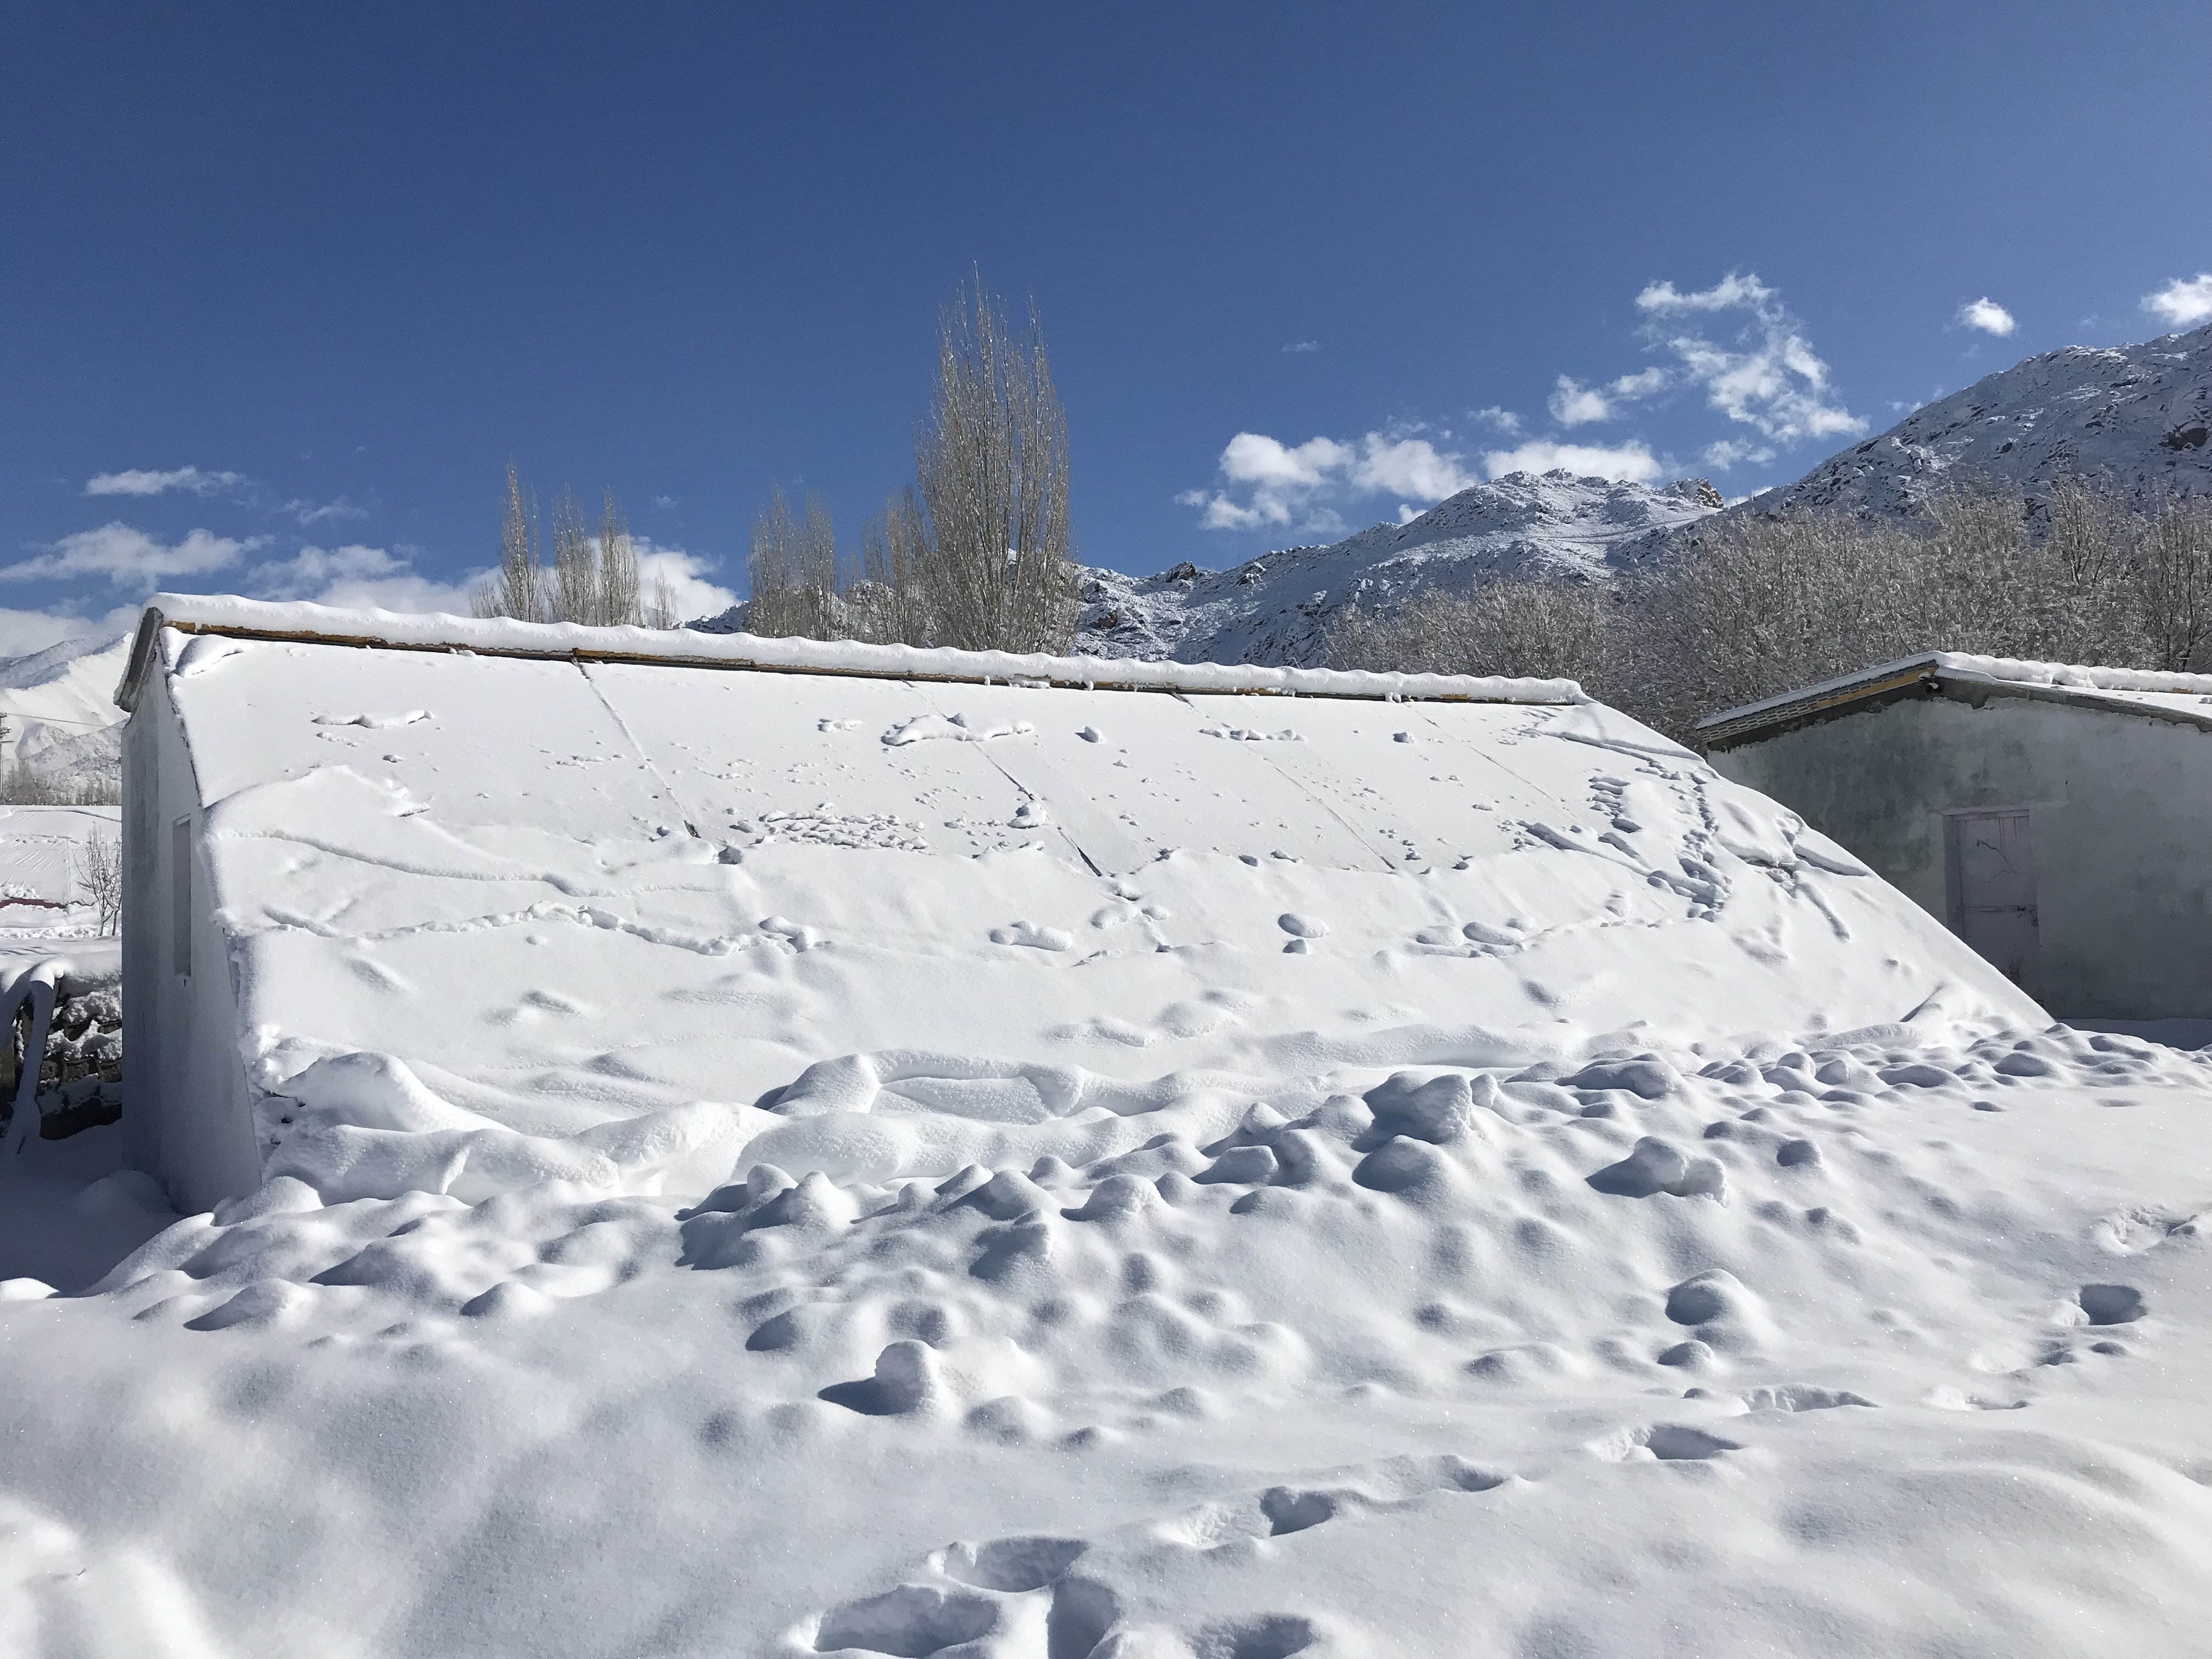 Passive solar greeenhouse covered in snow during the winter. (Source: Dr Tsering Stobdan)